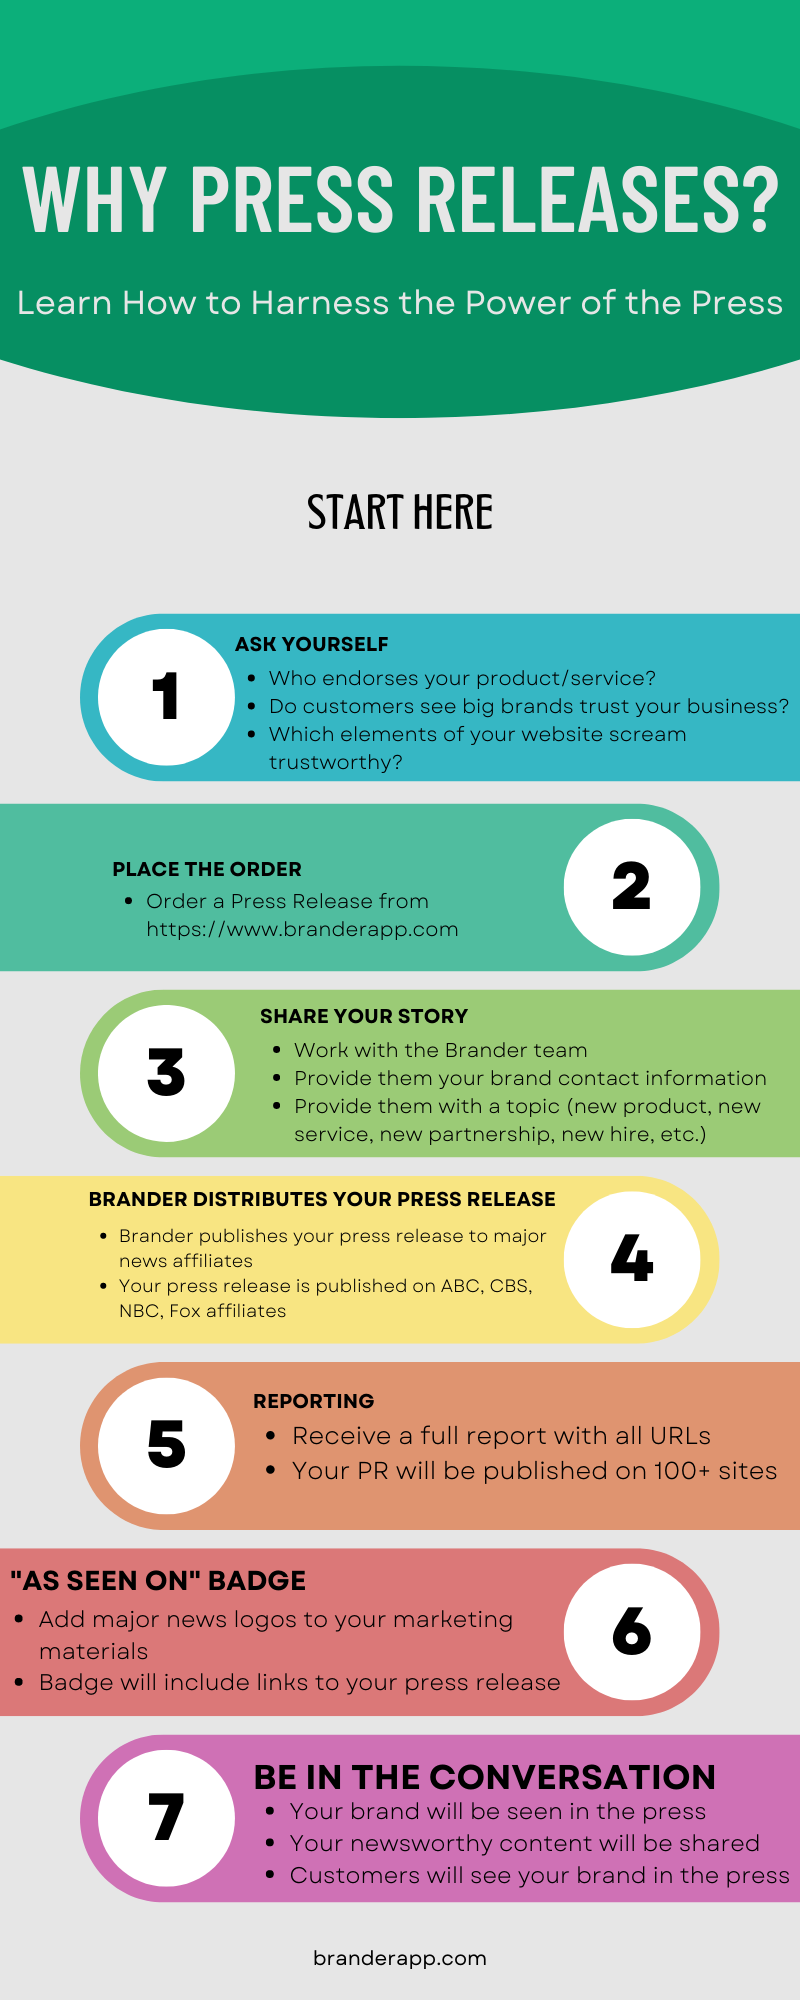 Why Press Releases? Harness the Power of the Press